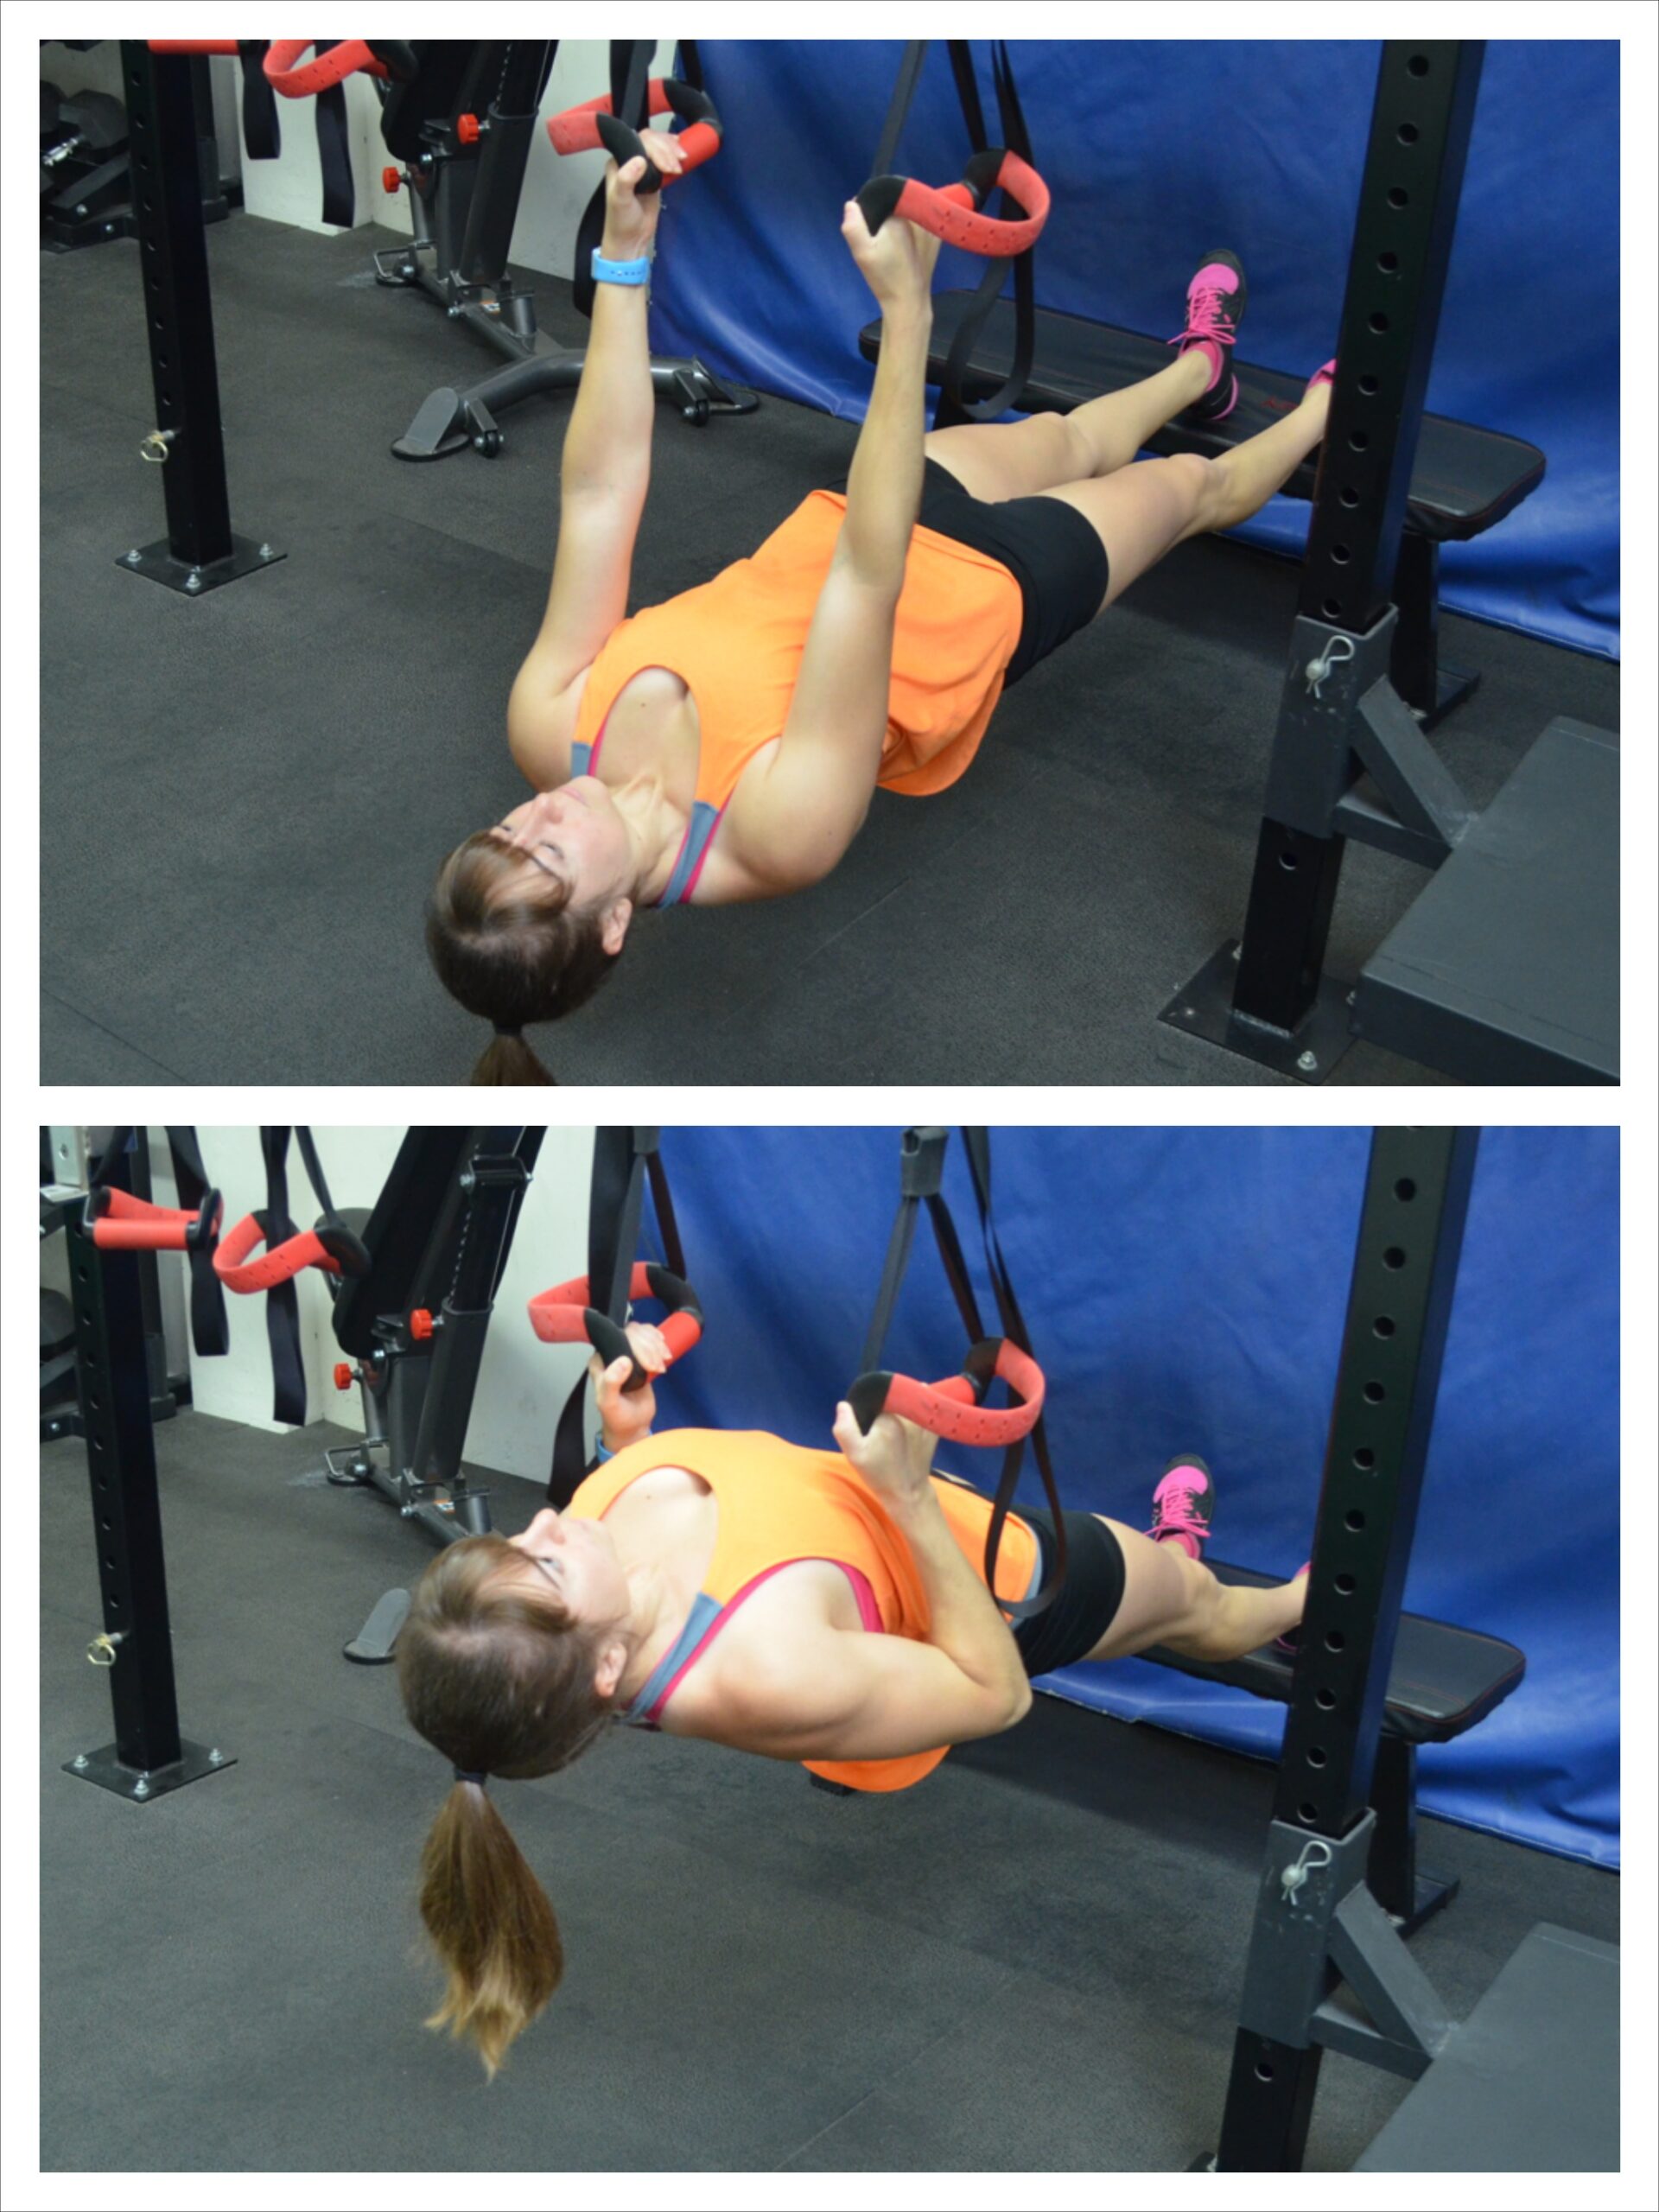 decline inverted row